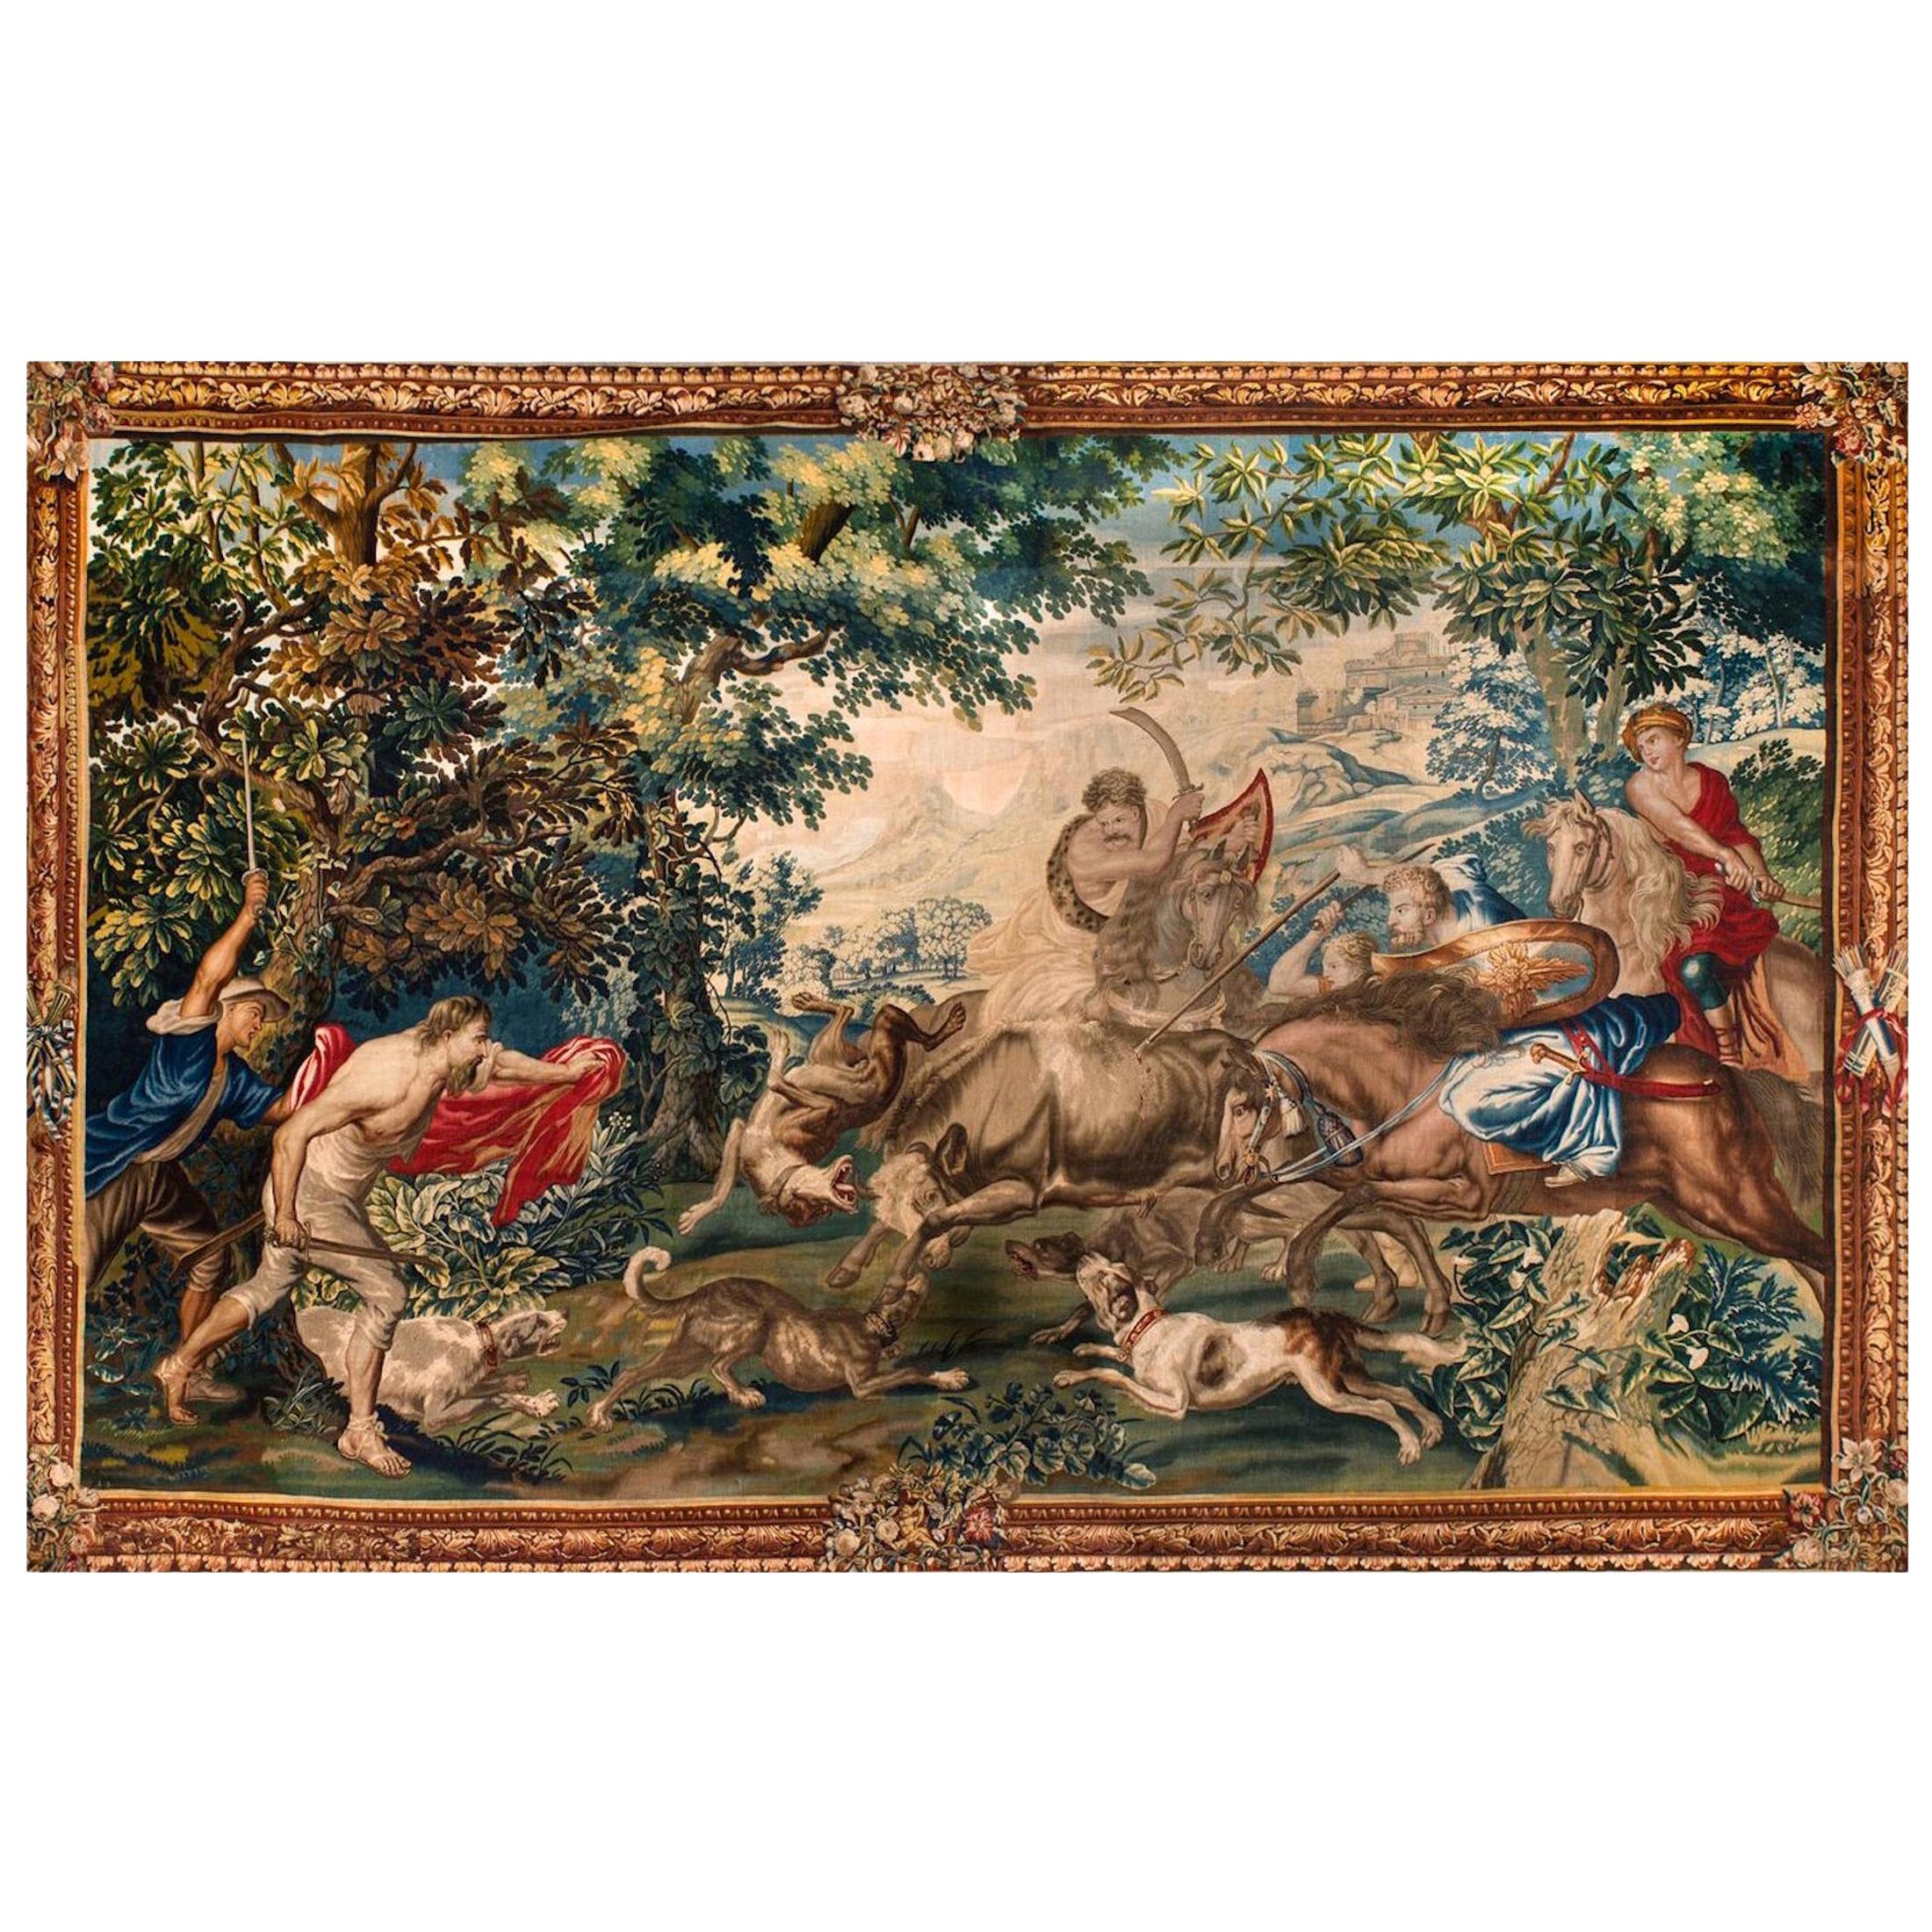 Outstanding Flemish Historical Tapestry the Bull Hunting, 17th Century